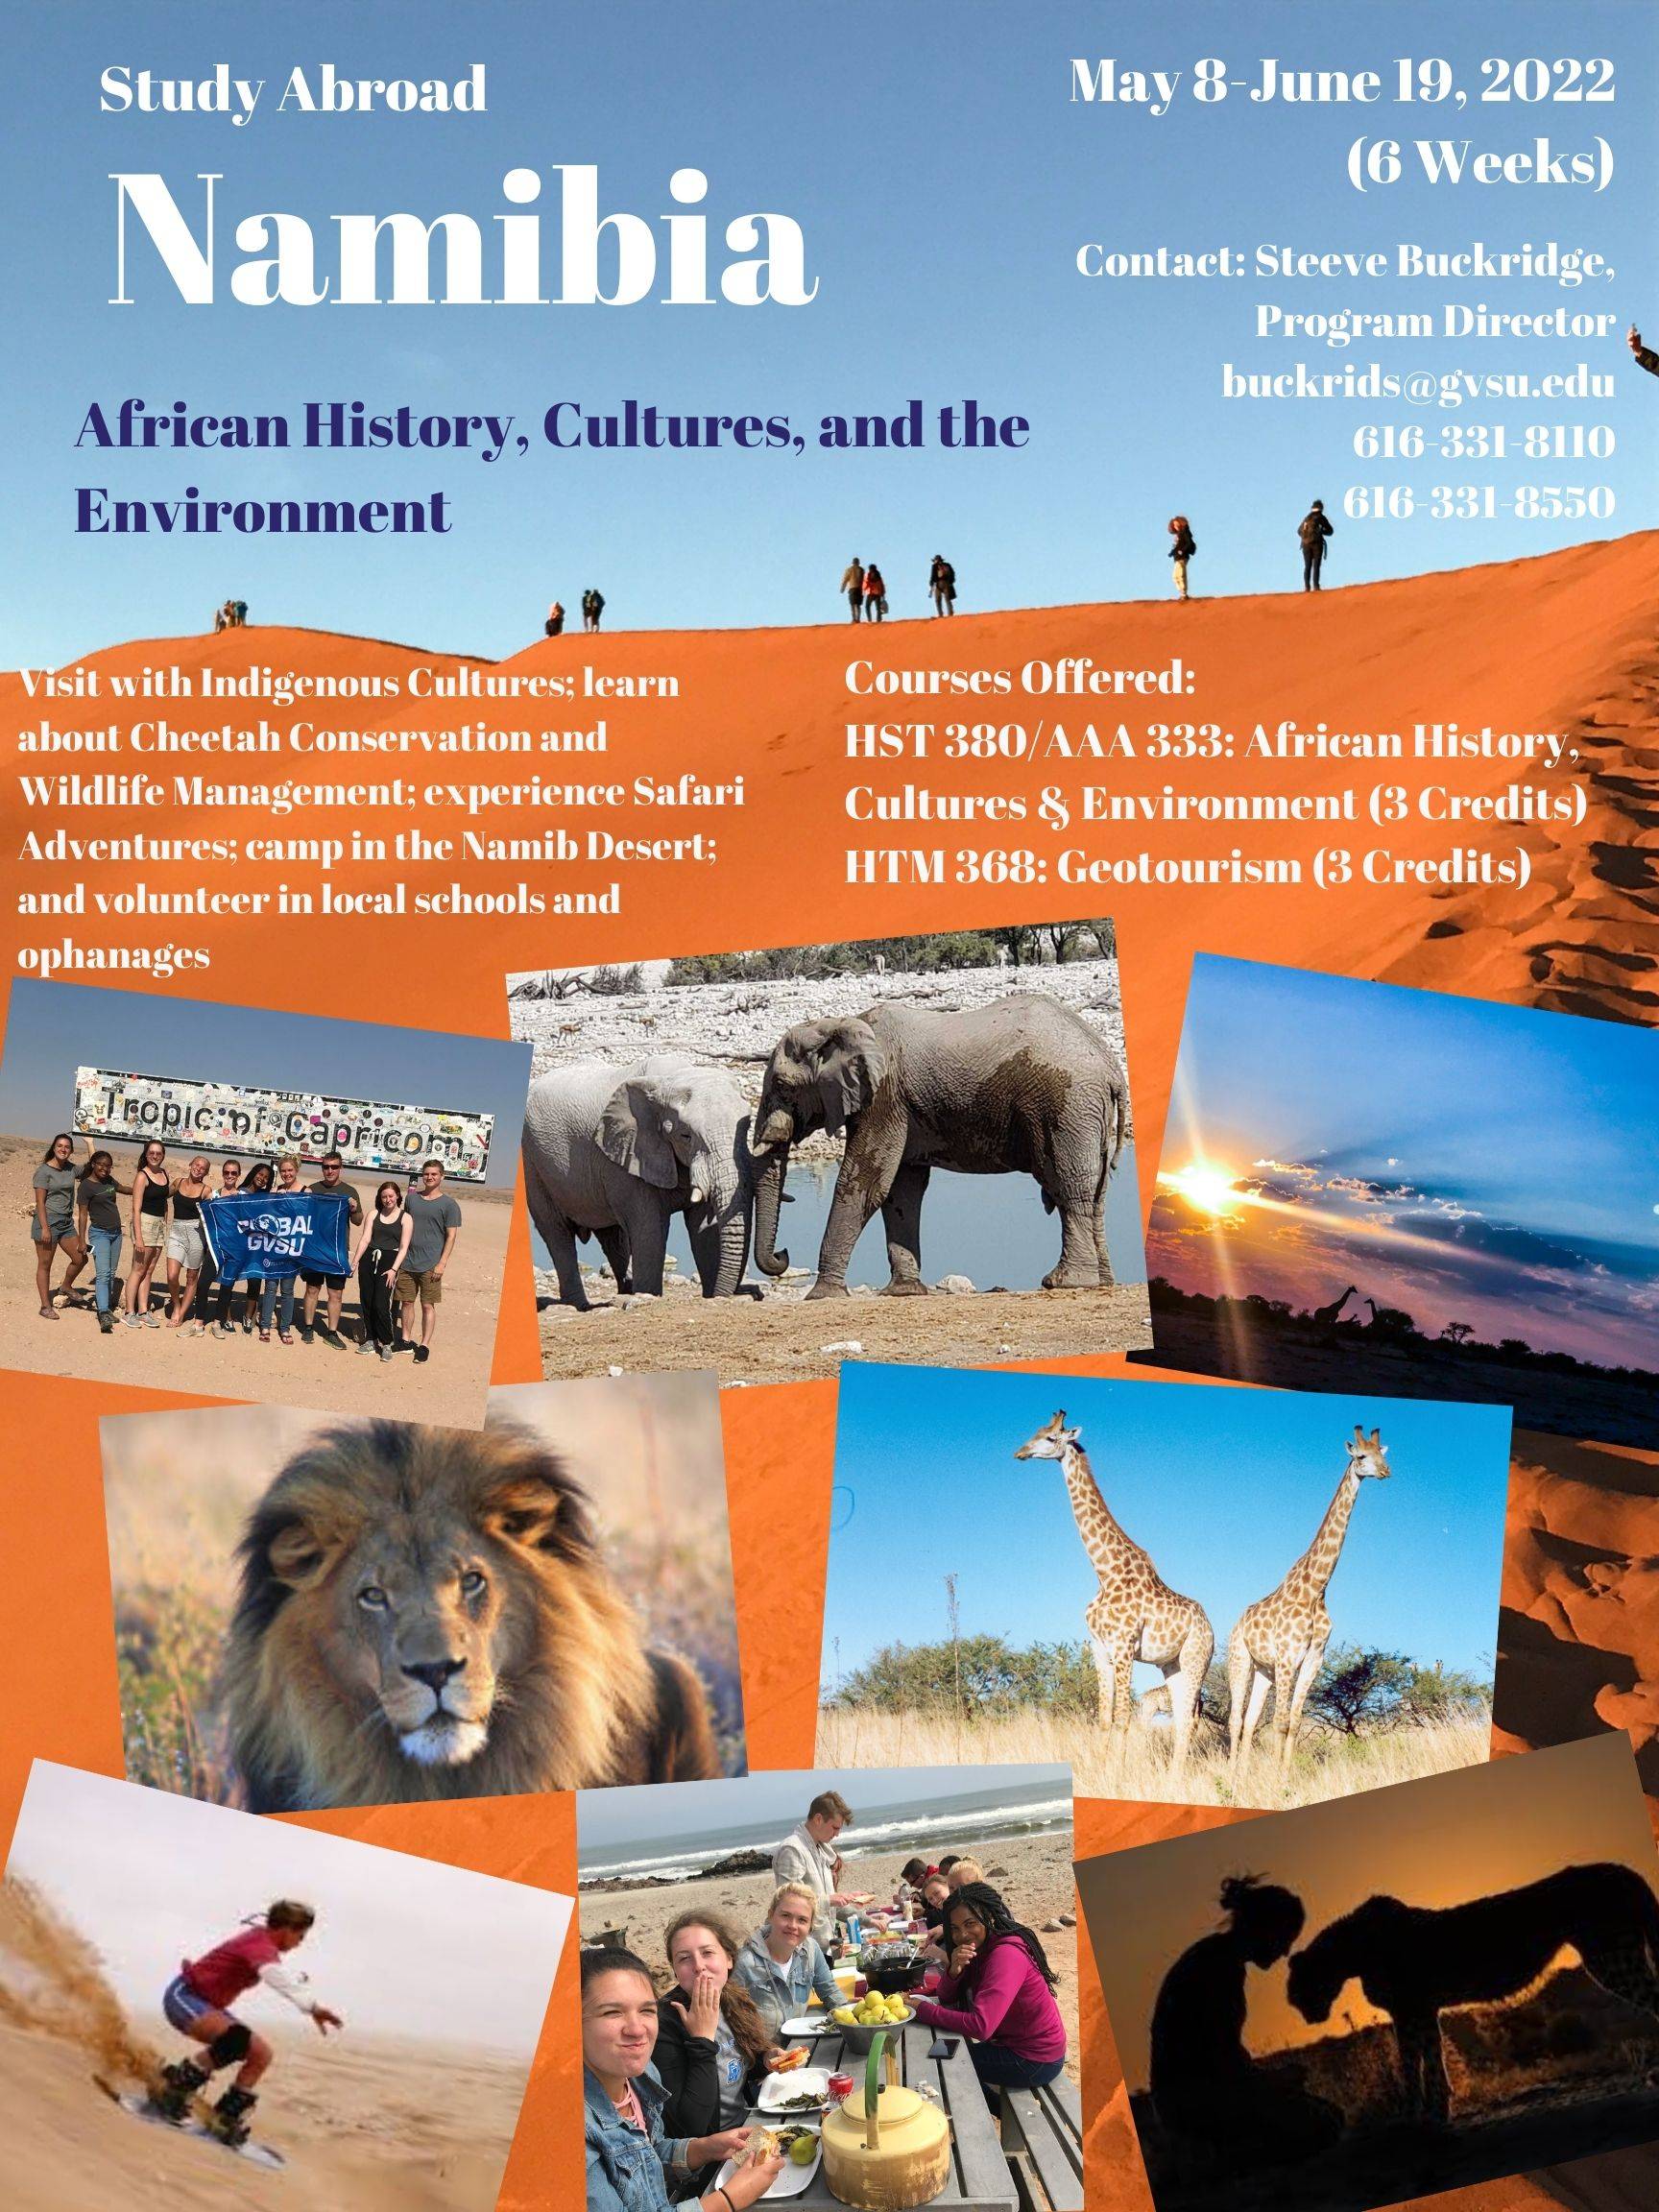 Flyer promoting Study Abroad Namibia